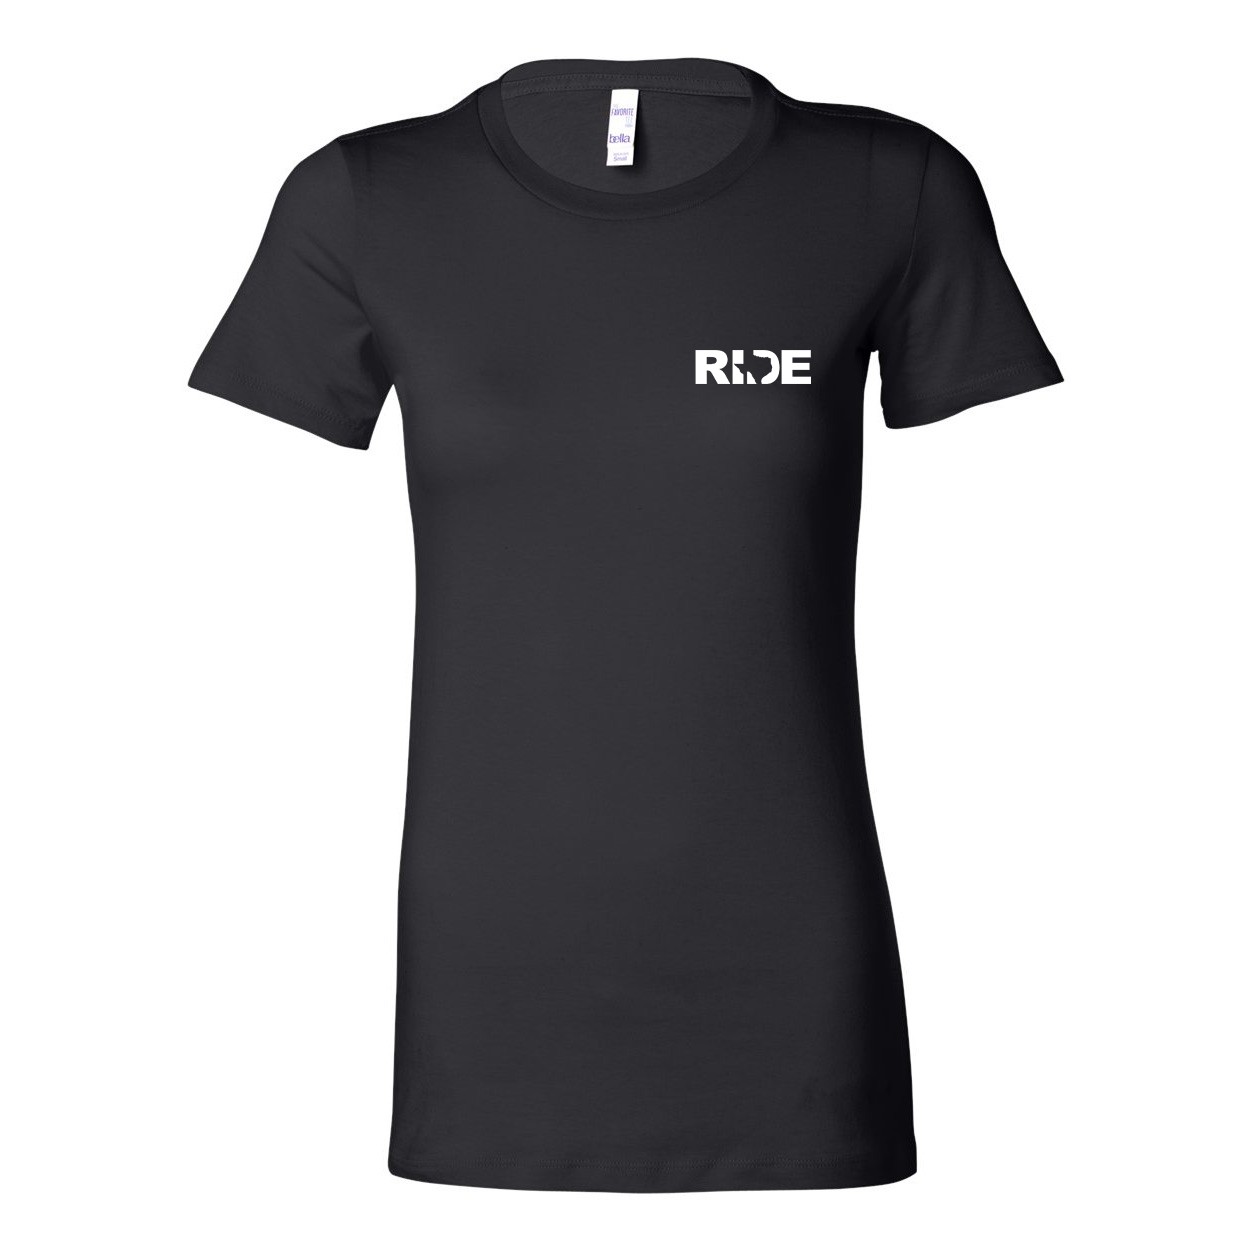 Ride Texas Women's Night Out Fitted Tri-Blend T-Shirt Black (White Logo)